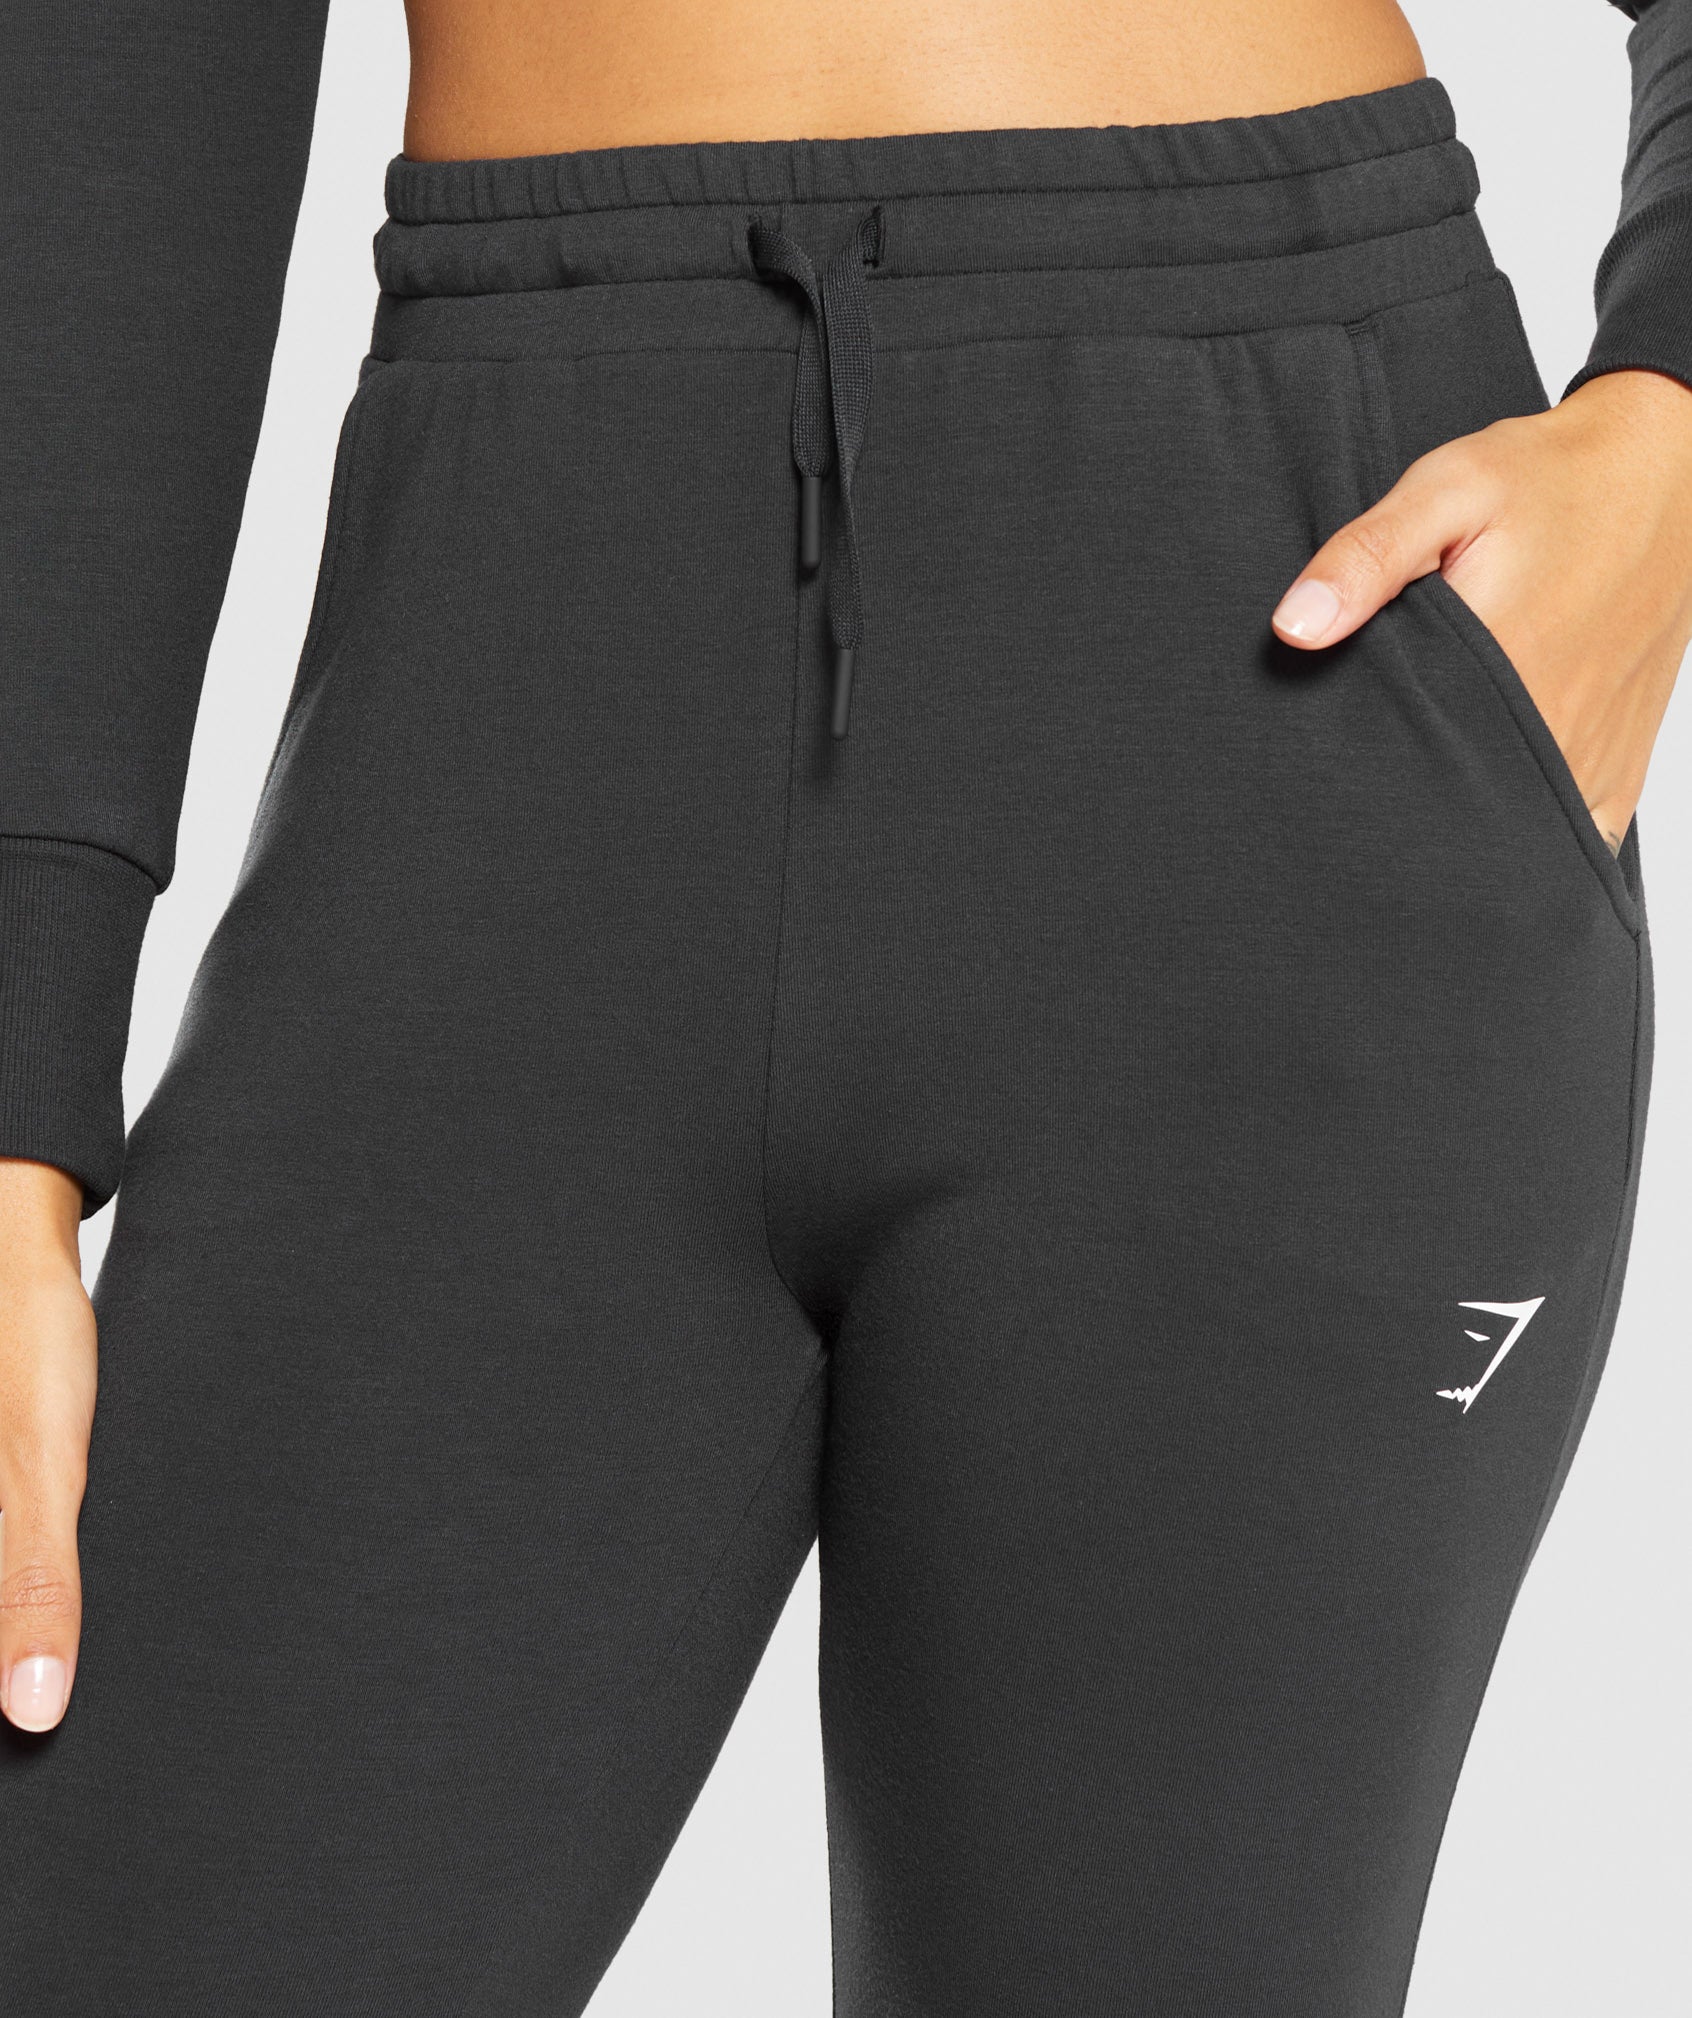 Pippa Training Joggers in Black - view 5